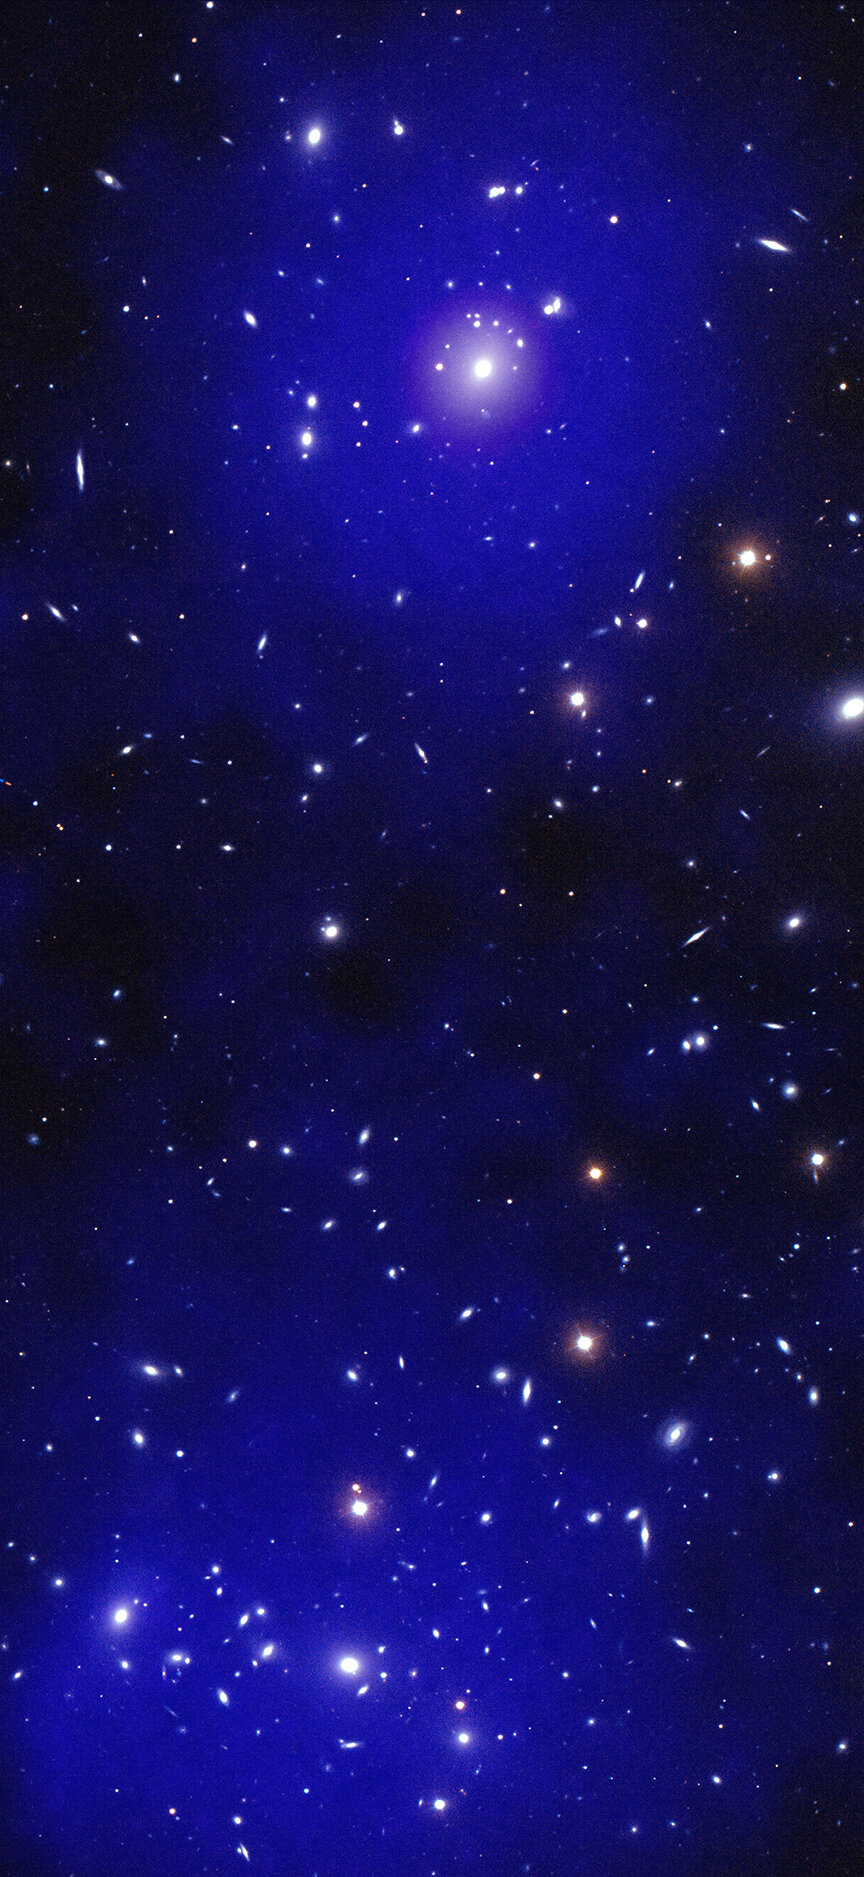 NASA's Chandra finds galaxy cluster collision on a 'WHIM'